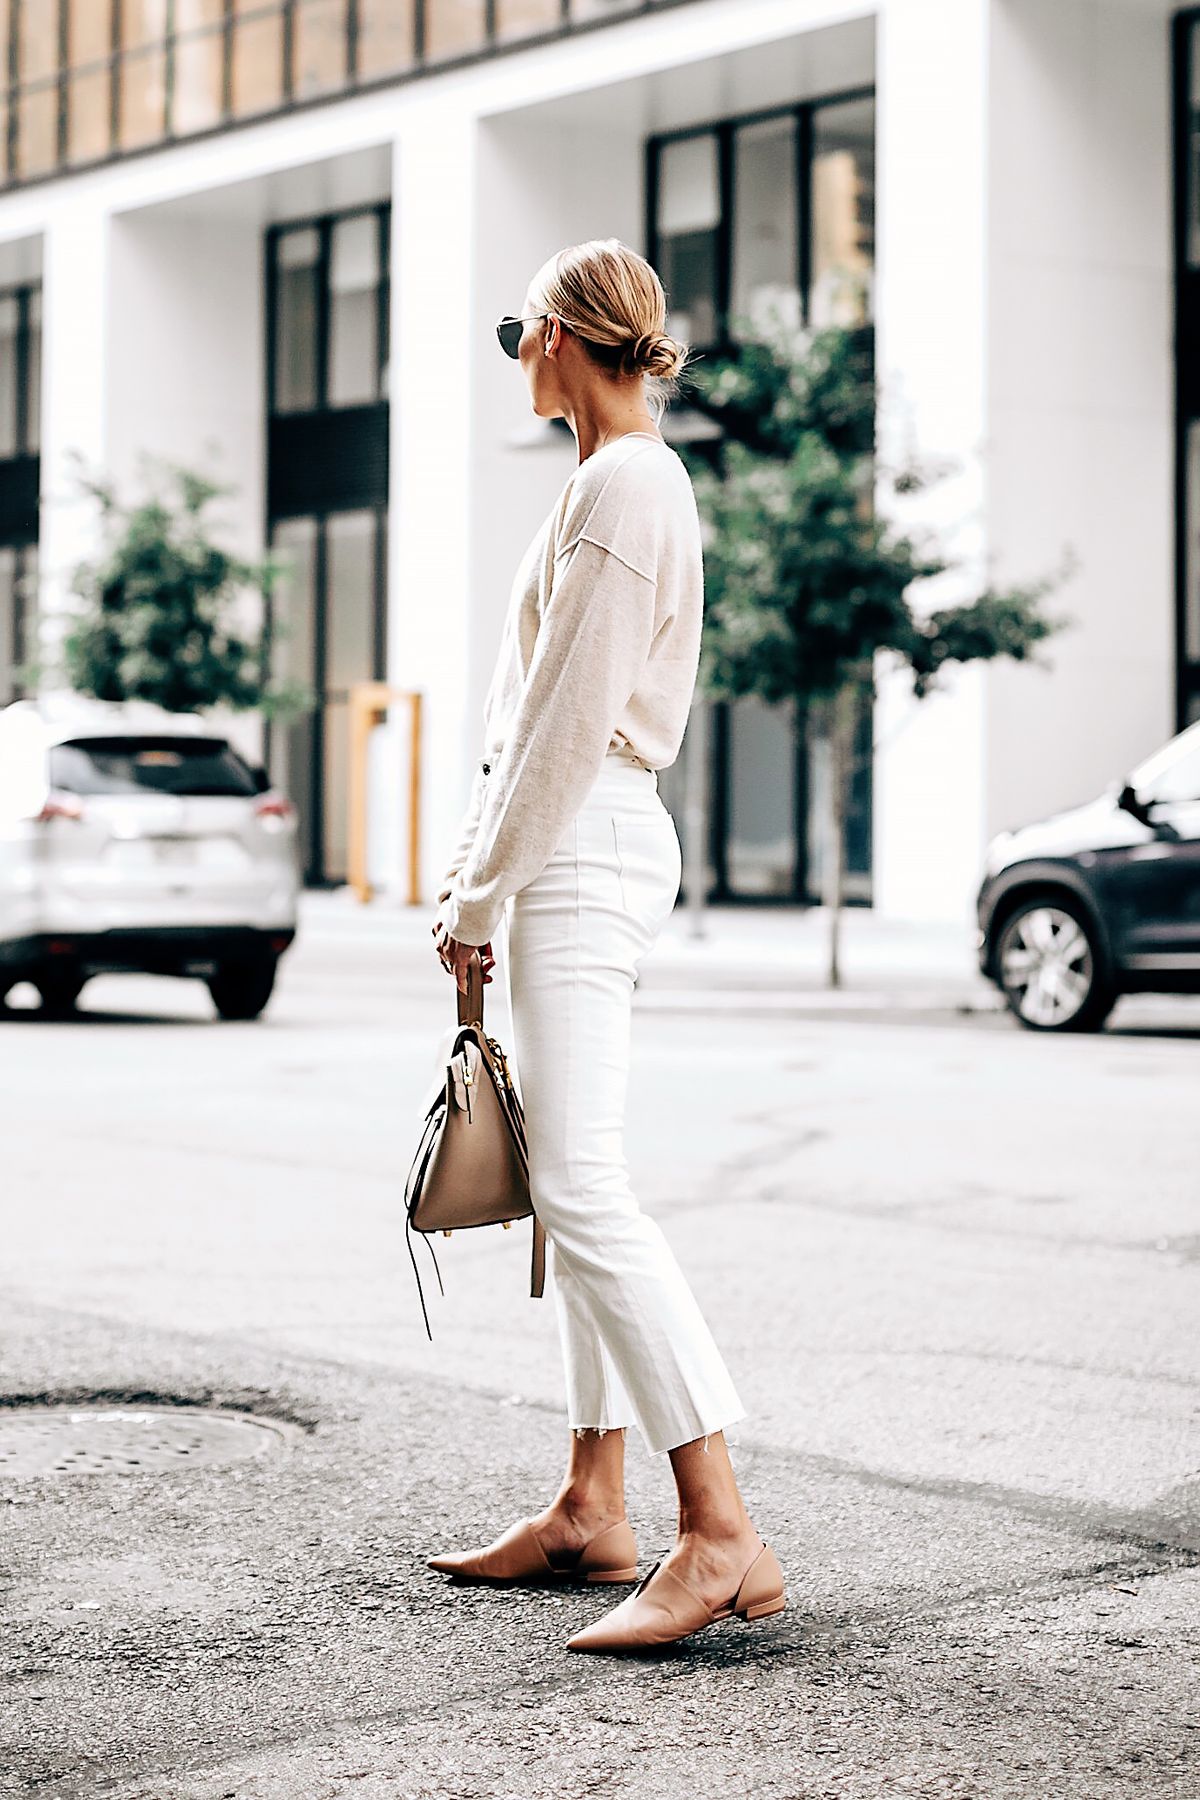 How to Style White Cropped Jeans: Best 13
Refreshing Outfit Ideas for Women